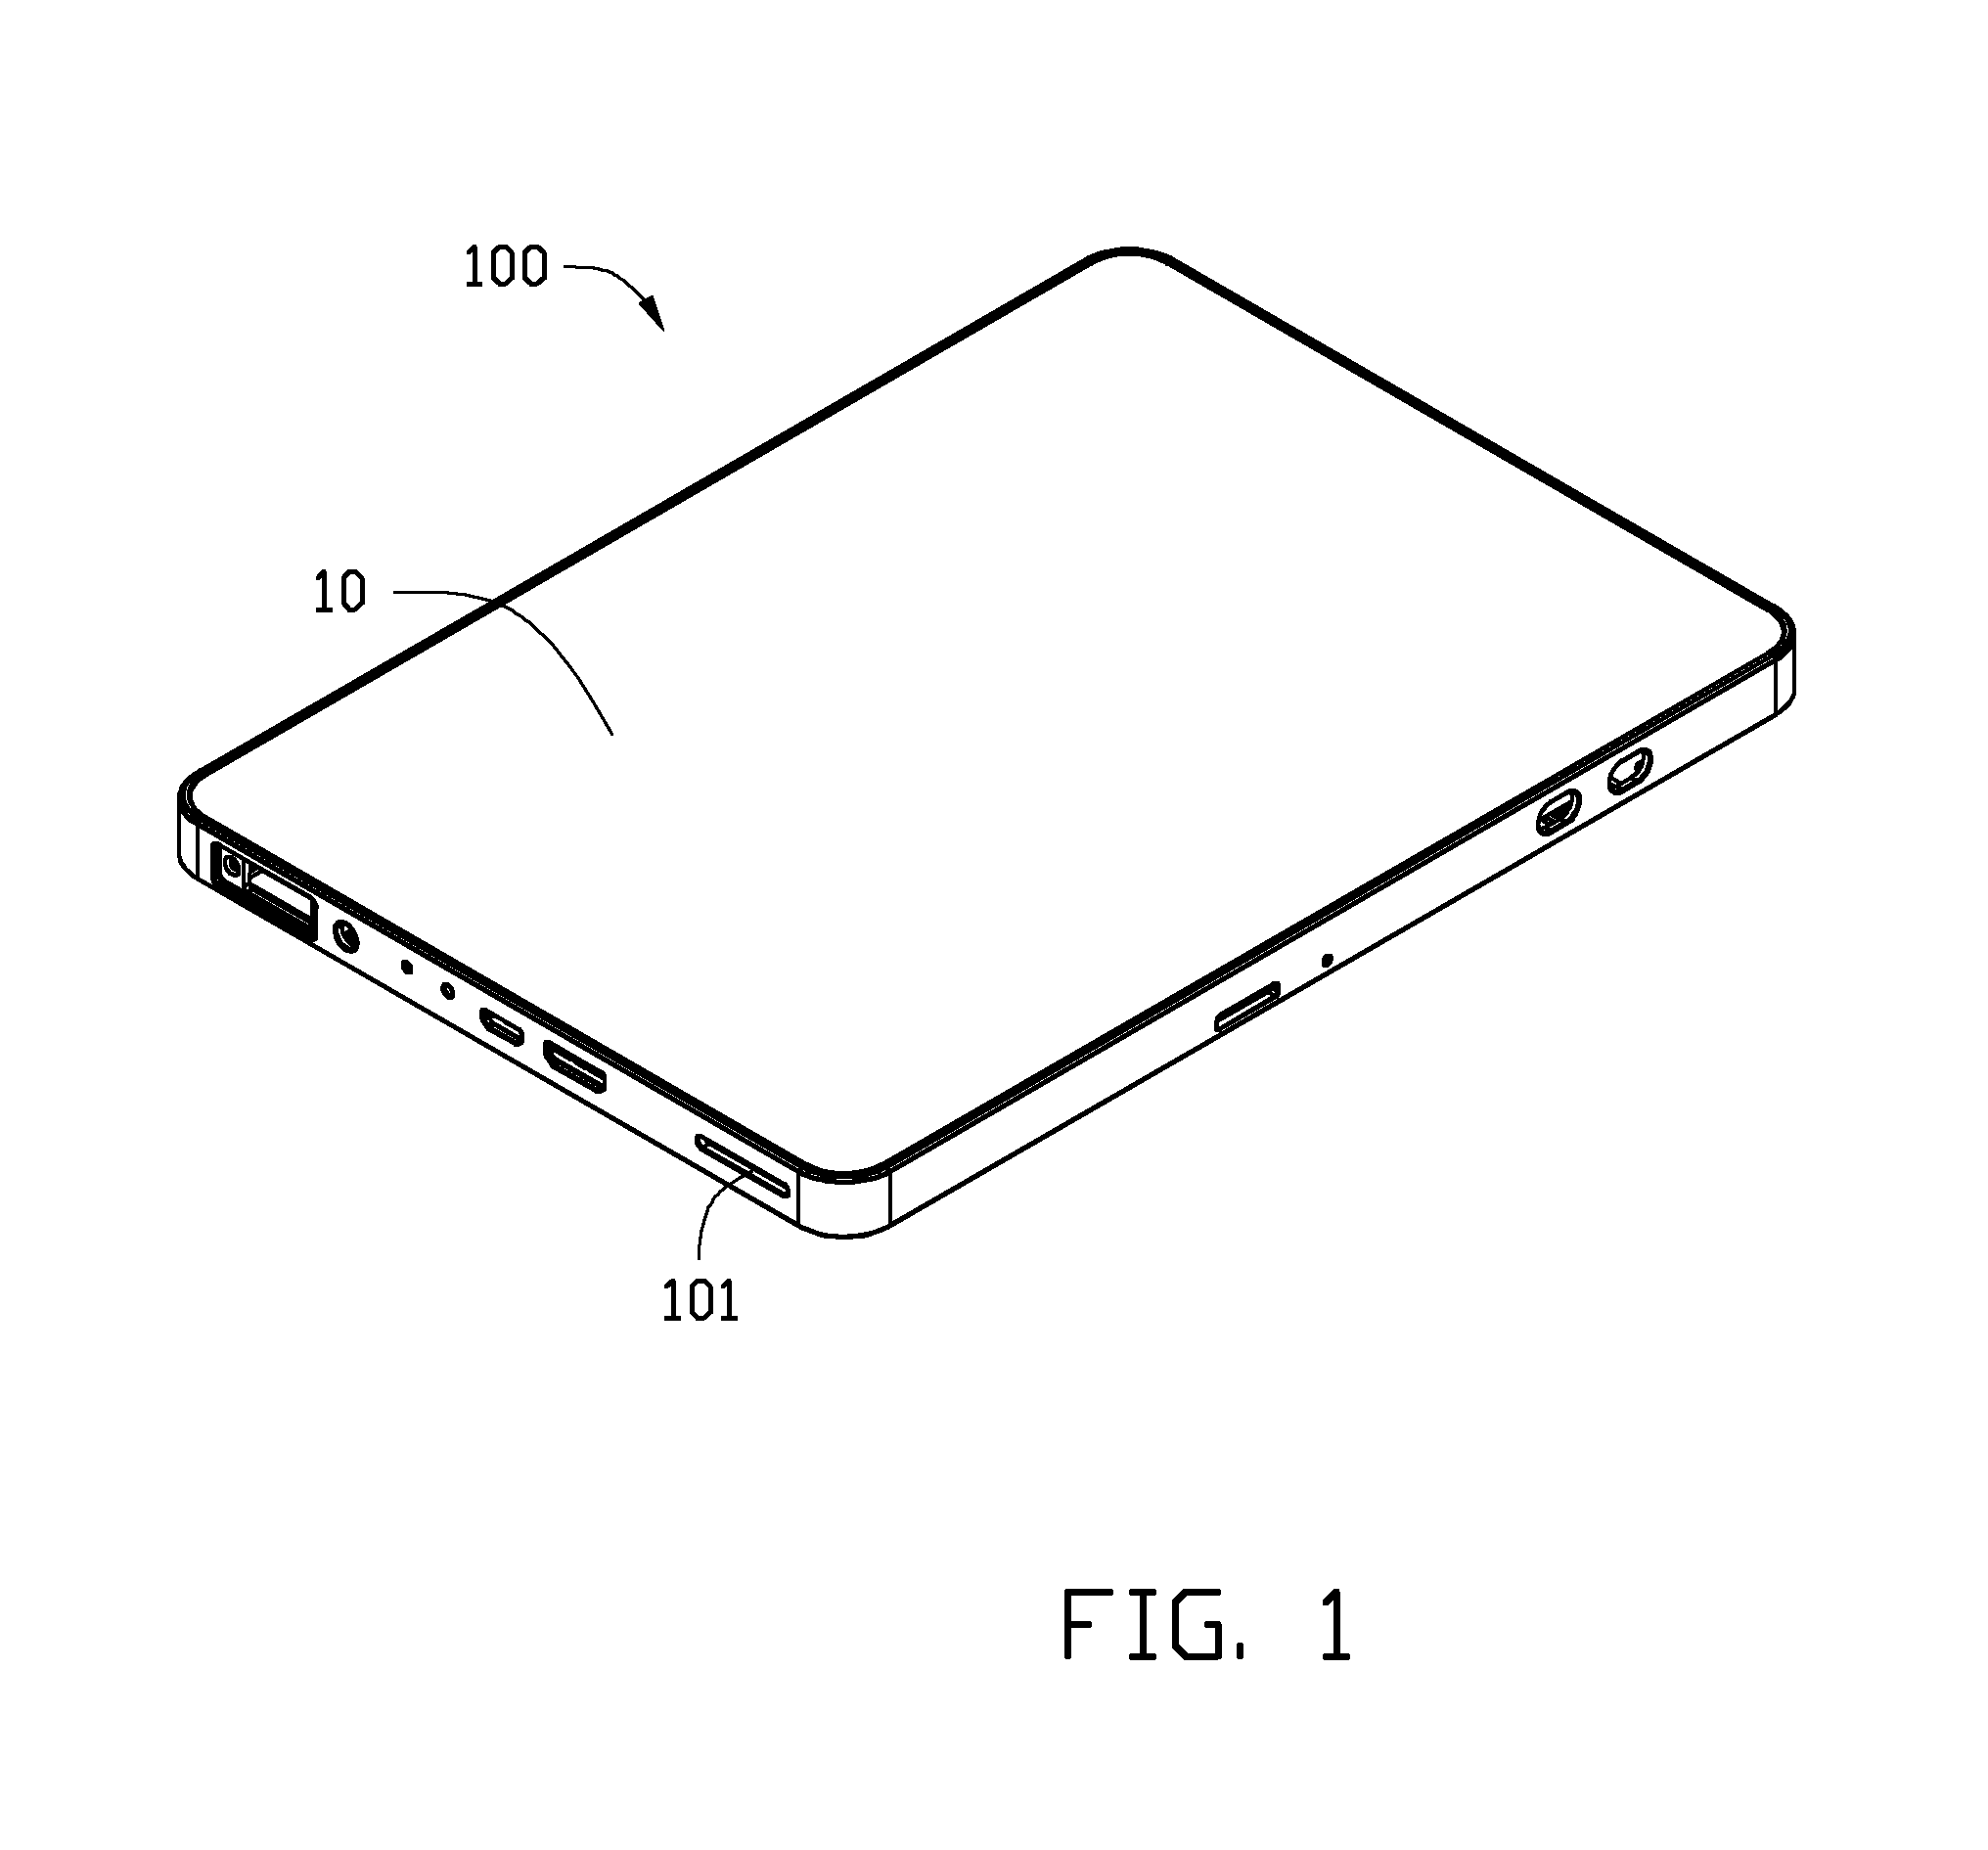 Electronic device with sound chamber